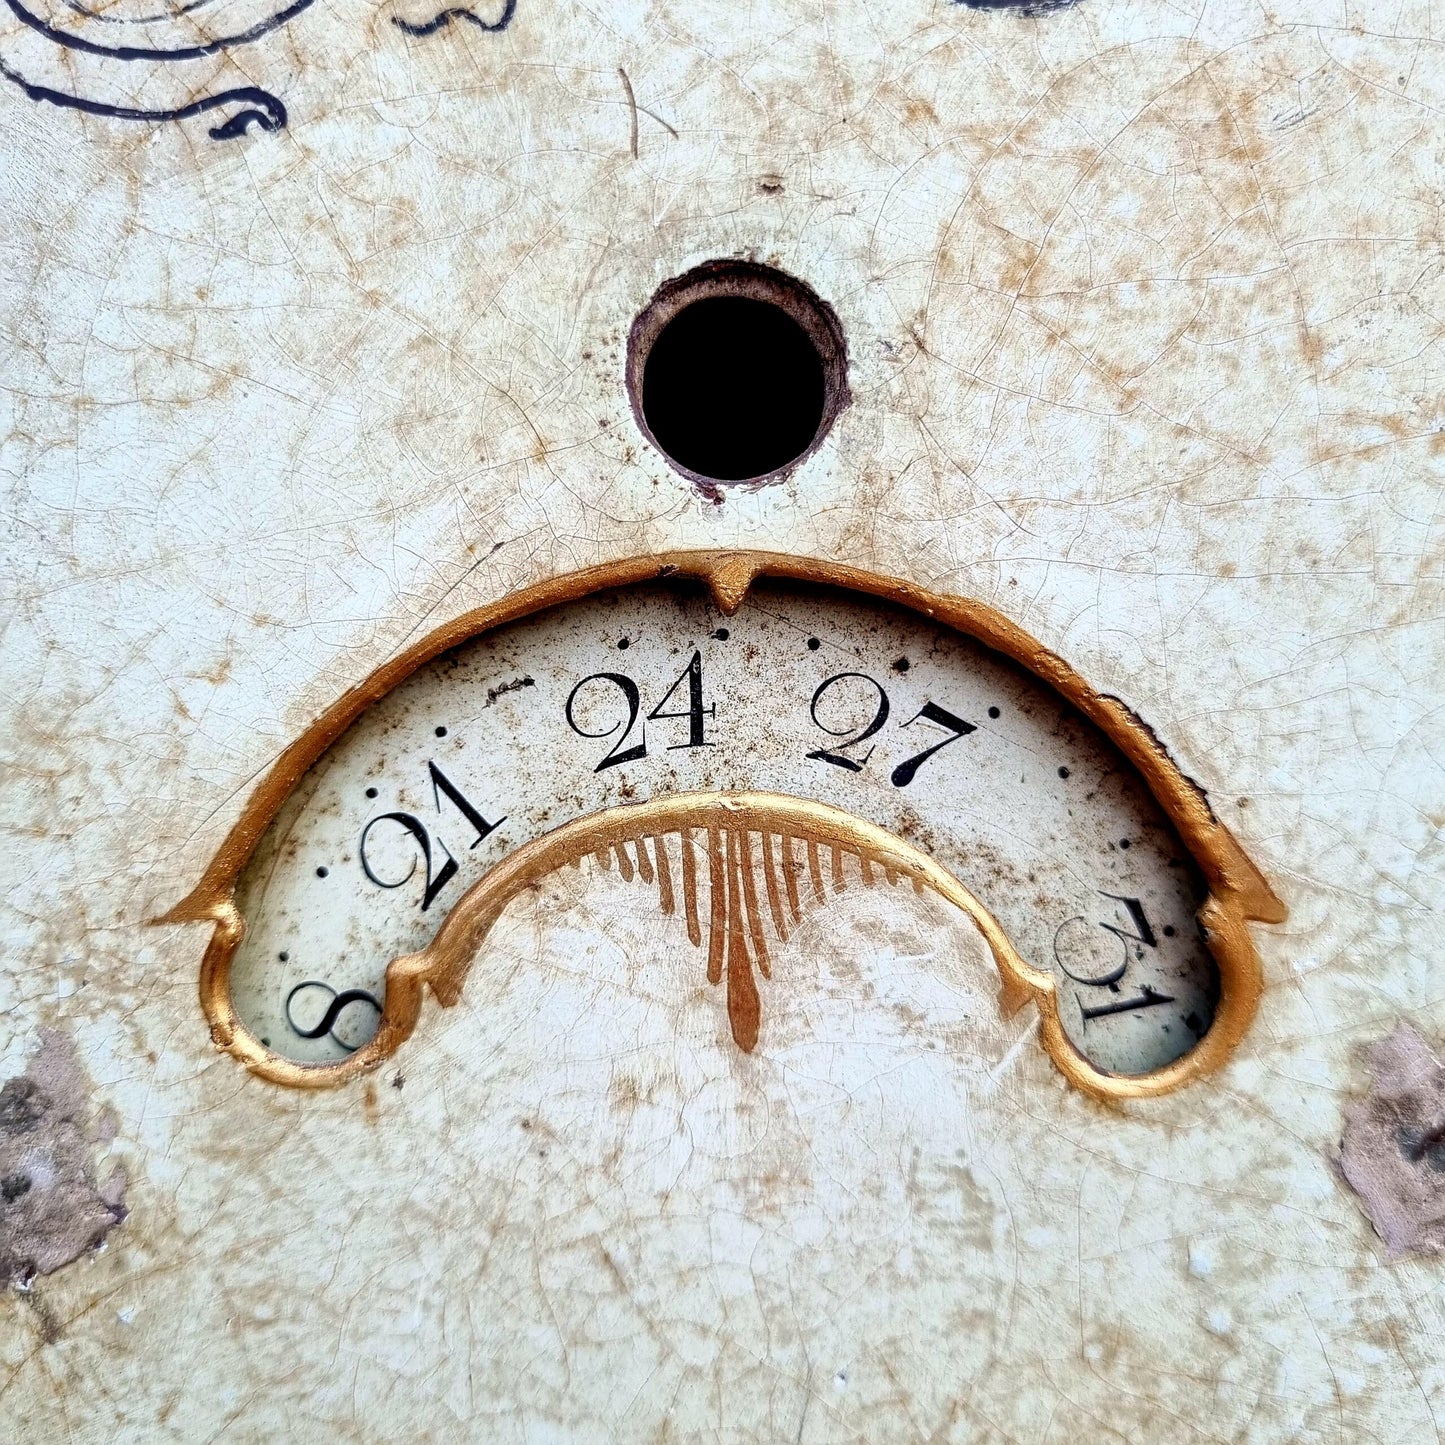 Early 19thC George III Period English Antique Painted Clock Dial, Signed "R Francis, Attleborough"